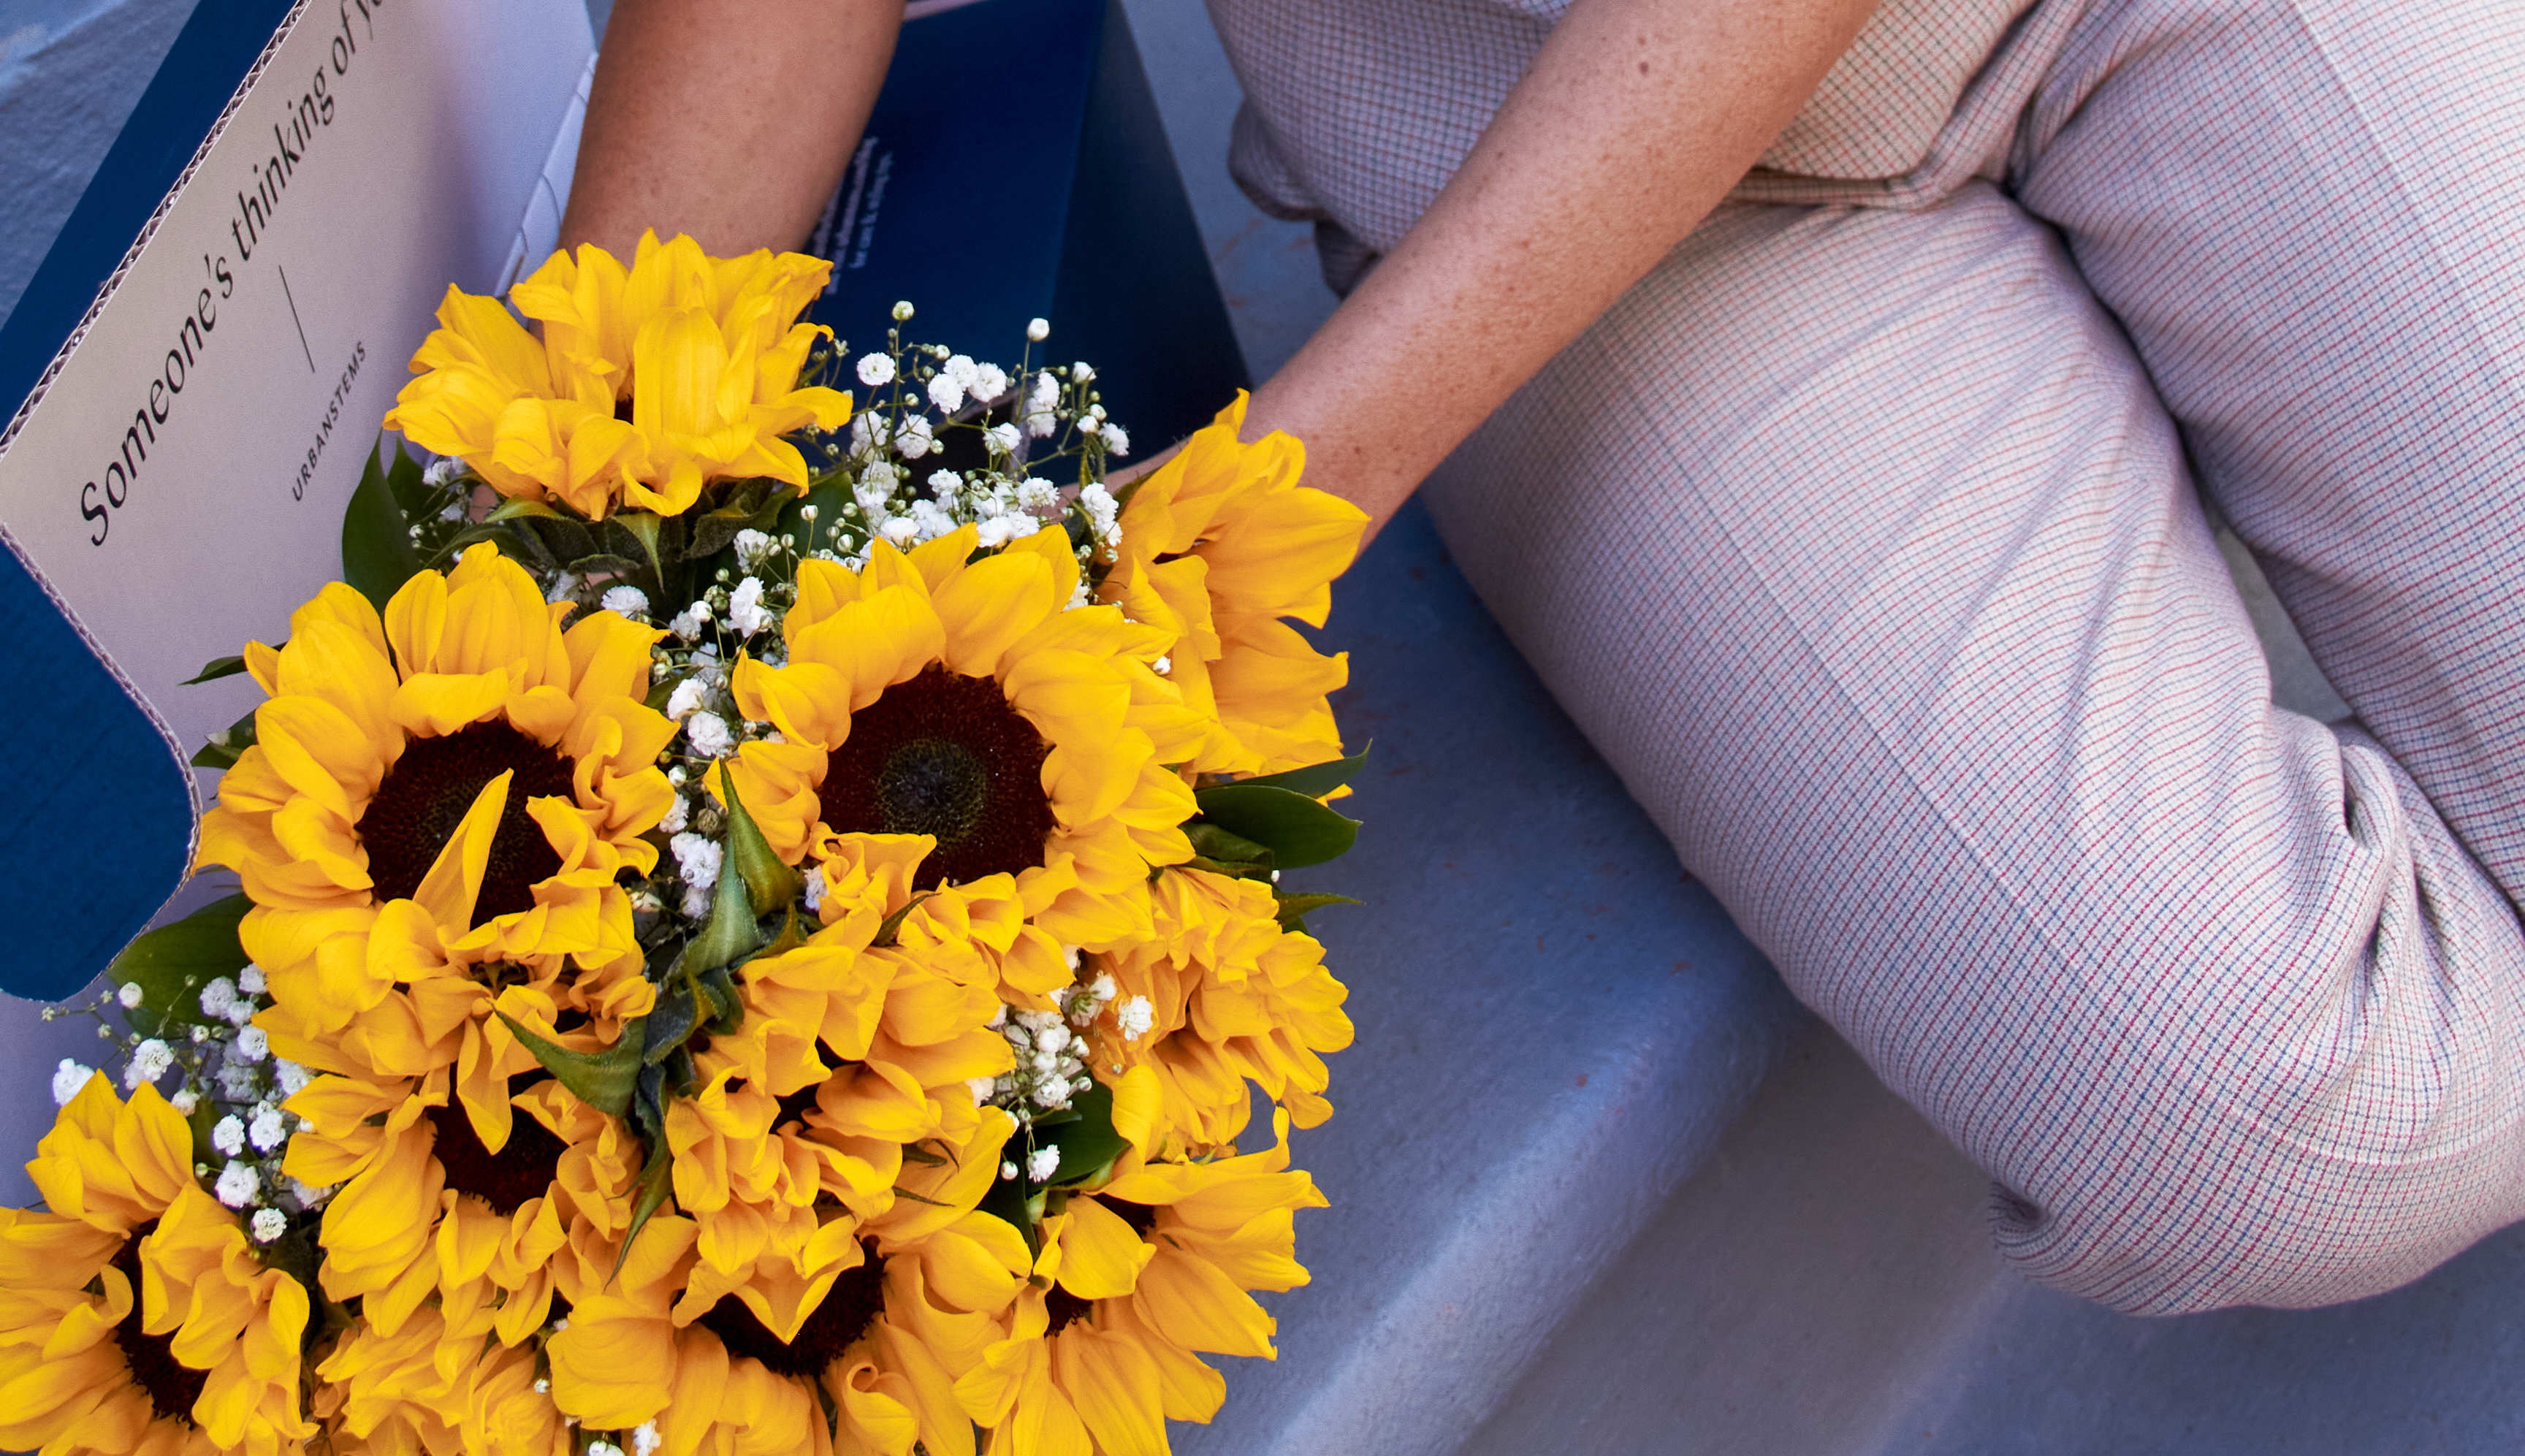 Woman with sunflower bouquet for next-day delivery